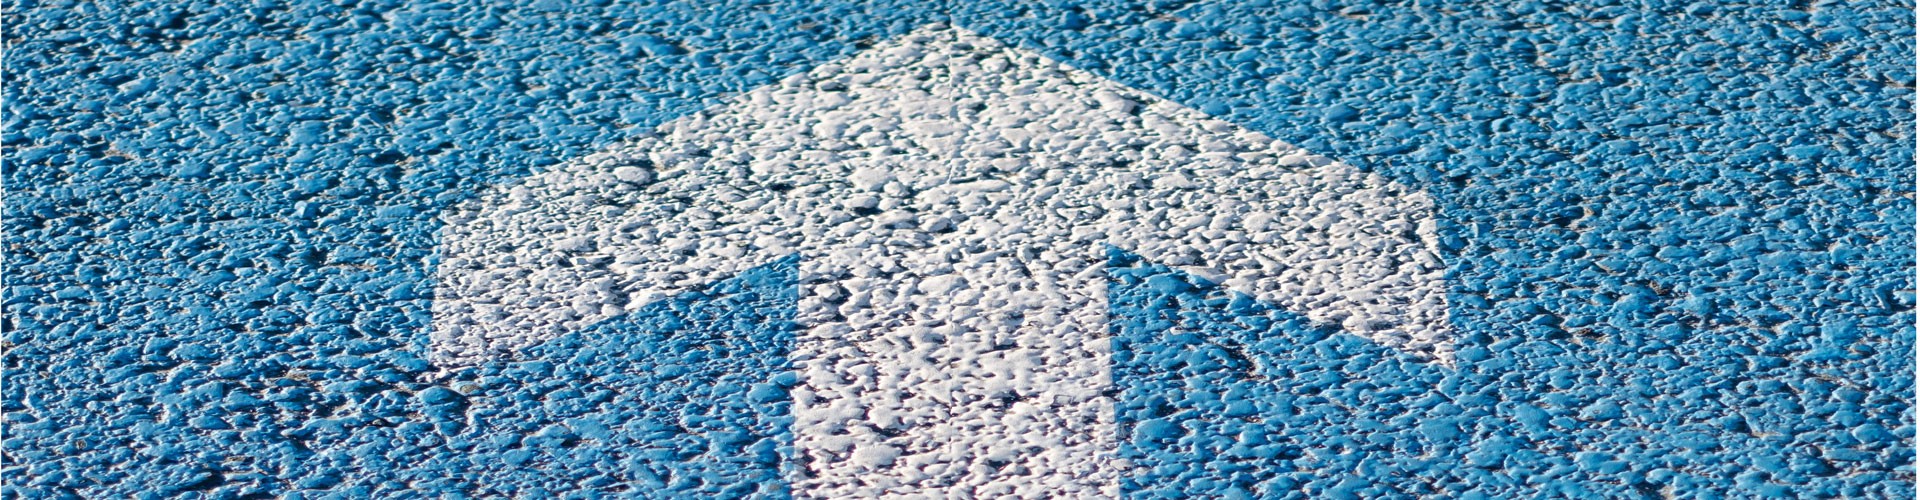 white arrow painted on blue tarmac background